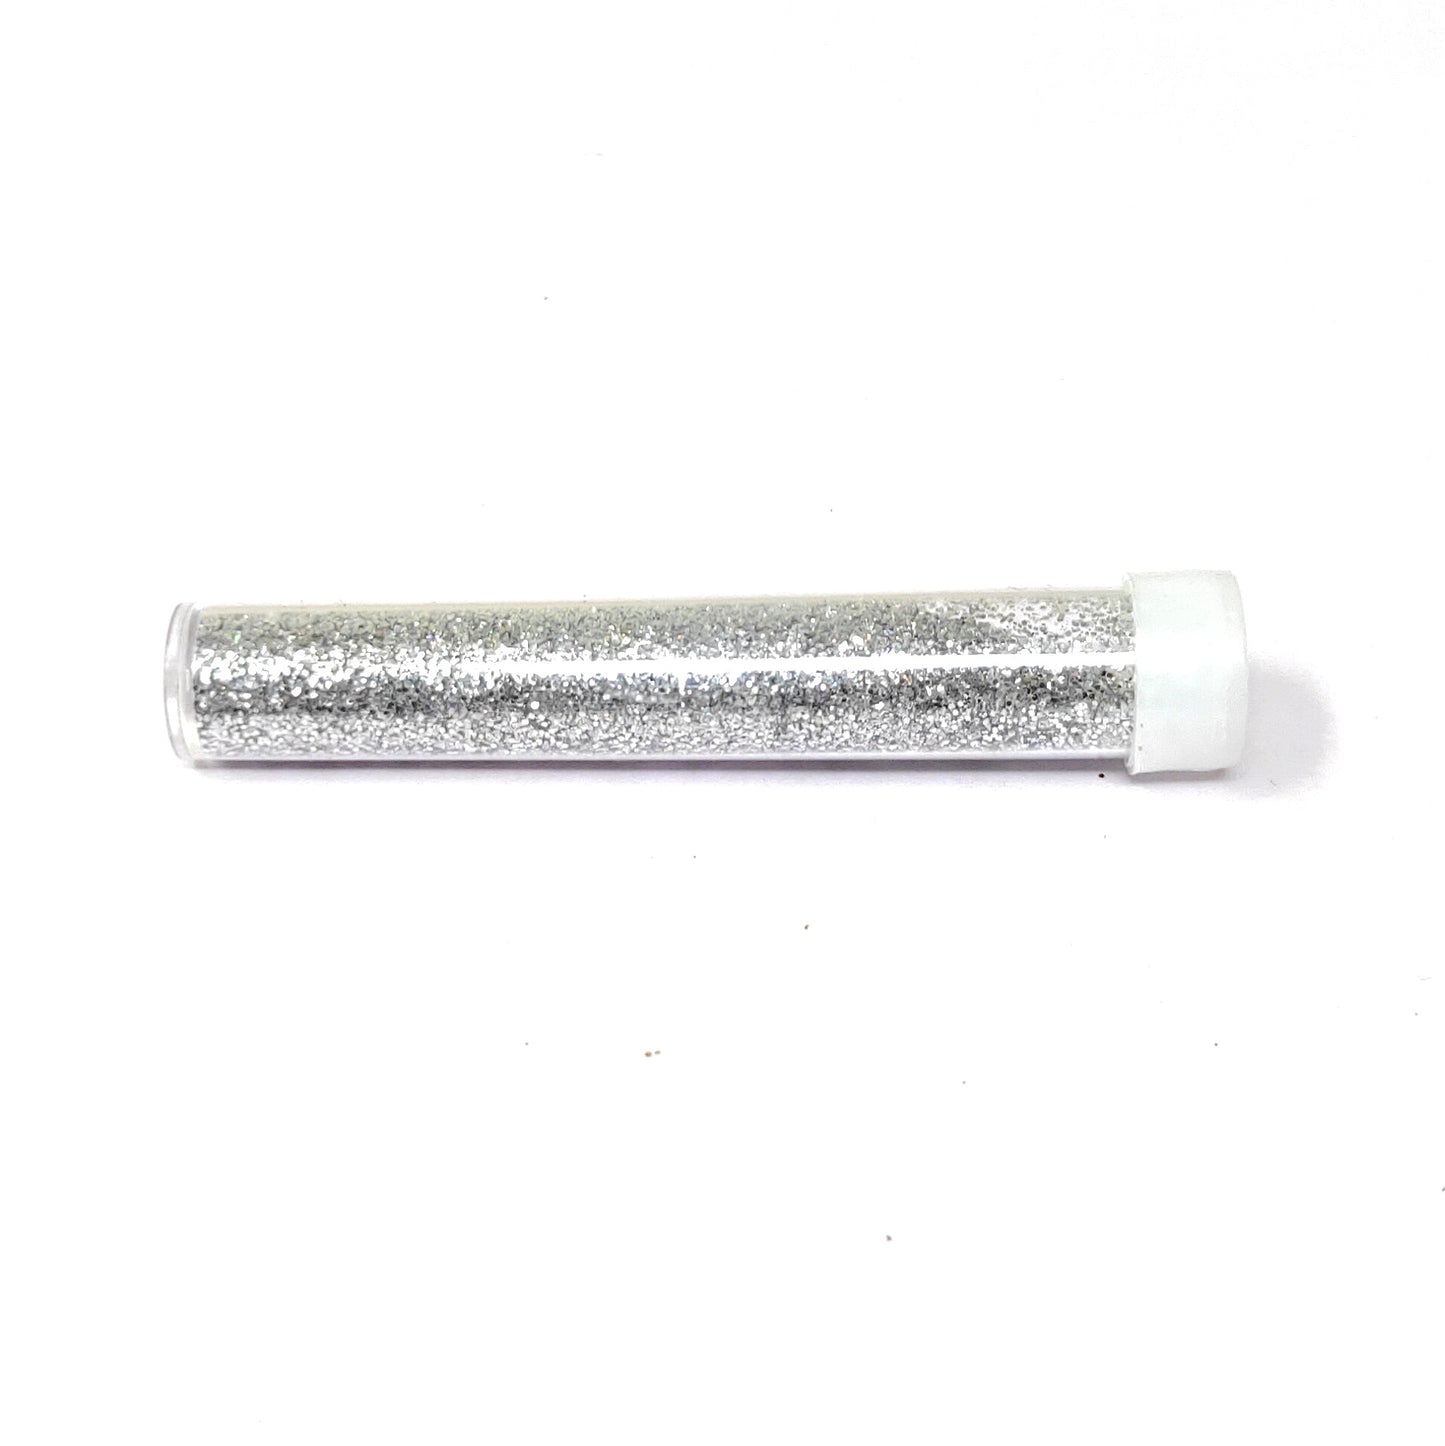 5 gram Silver Glitter for Arts and Crafts, Scrapbooking, Paper Decorations and Other Activities (005)